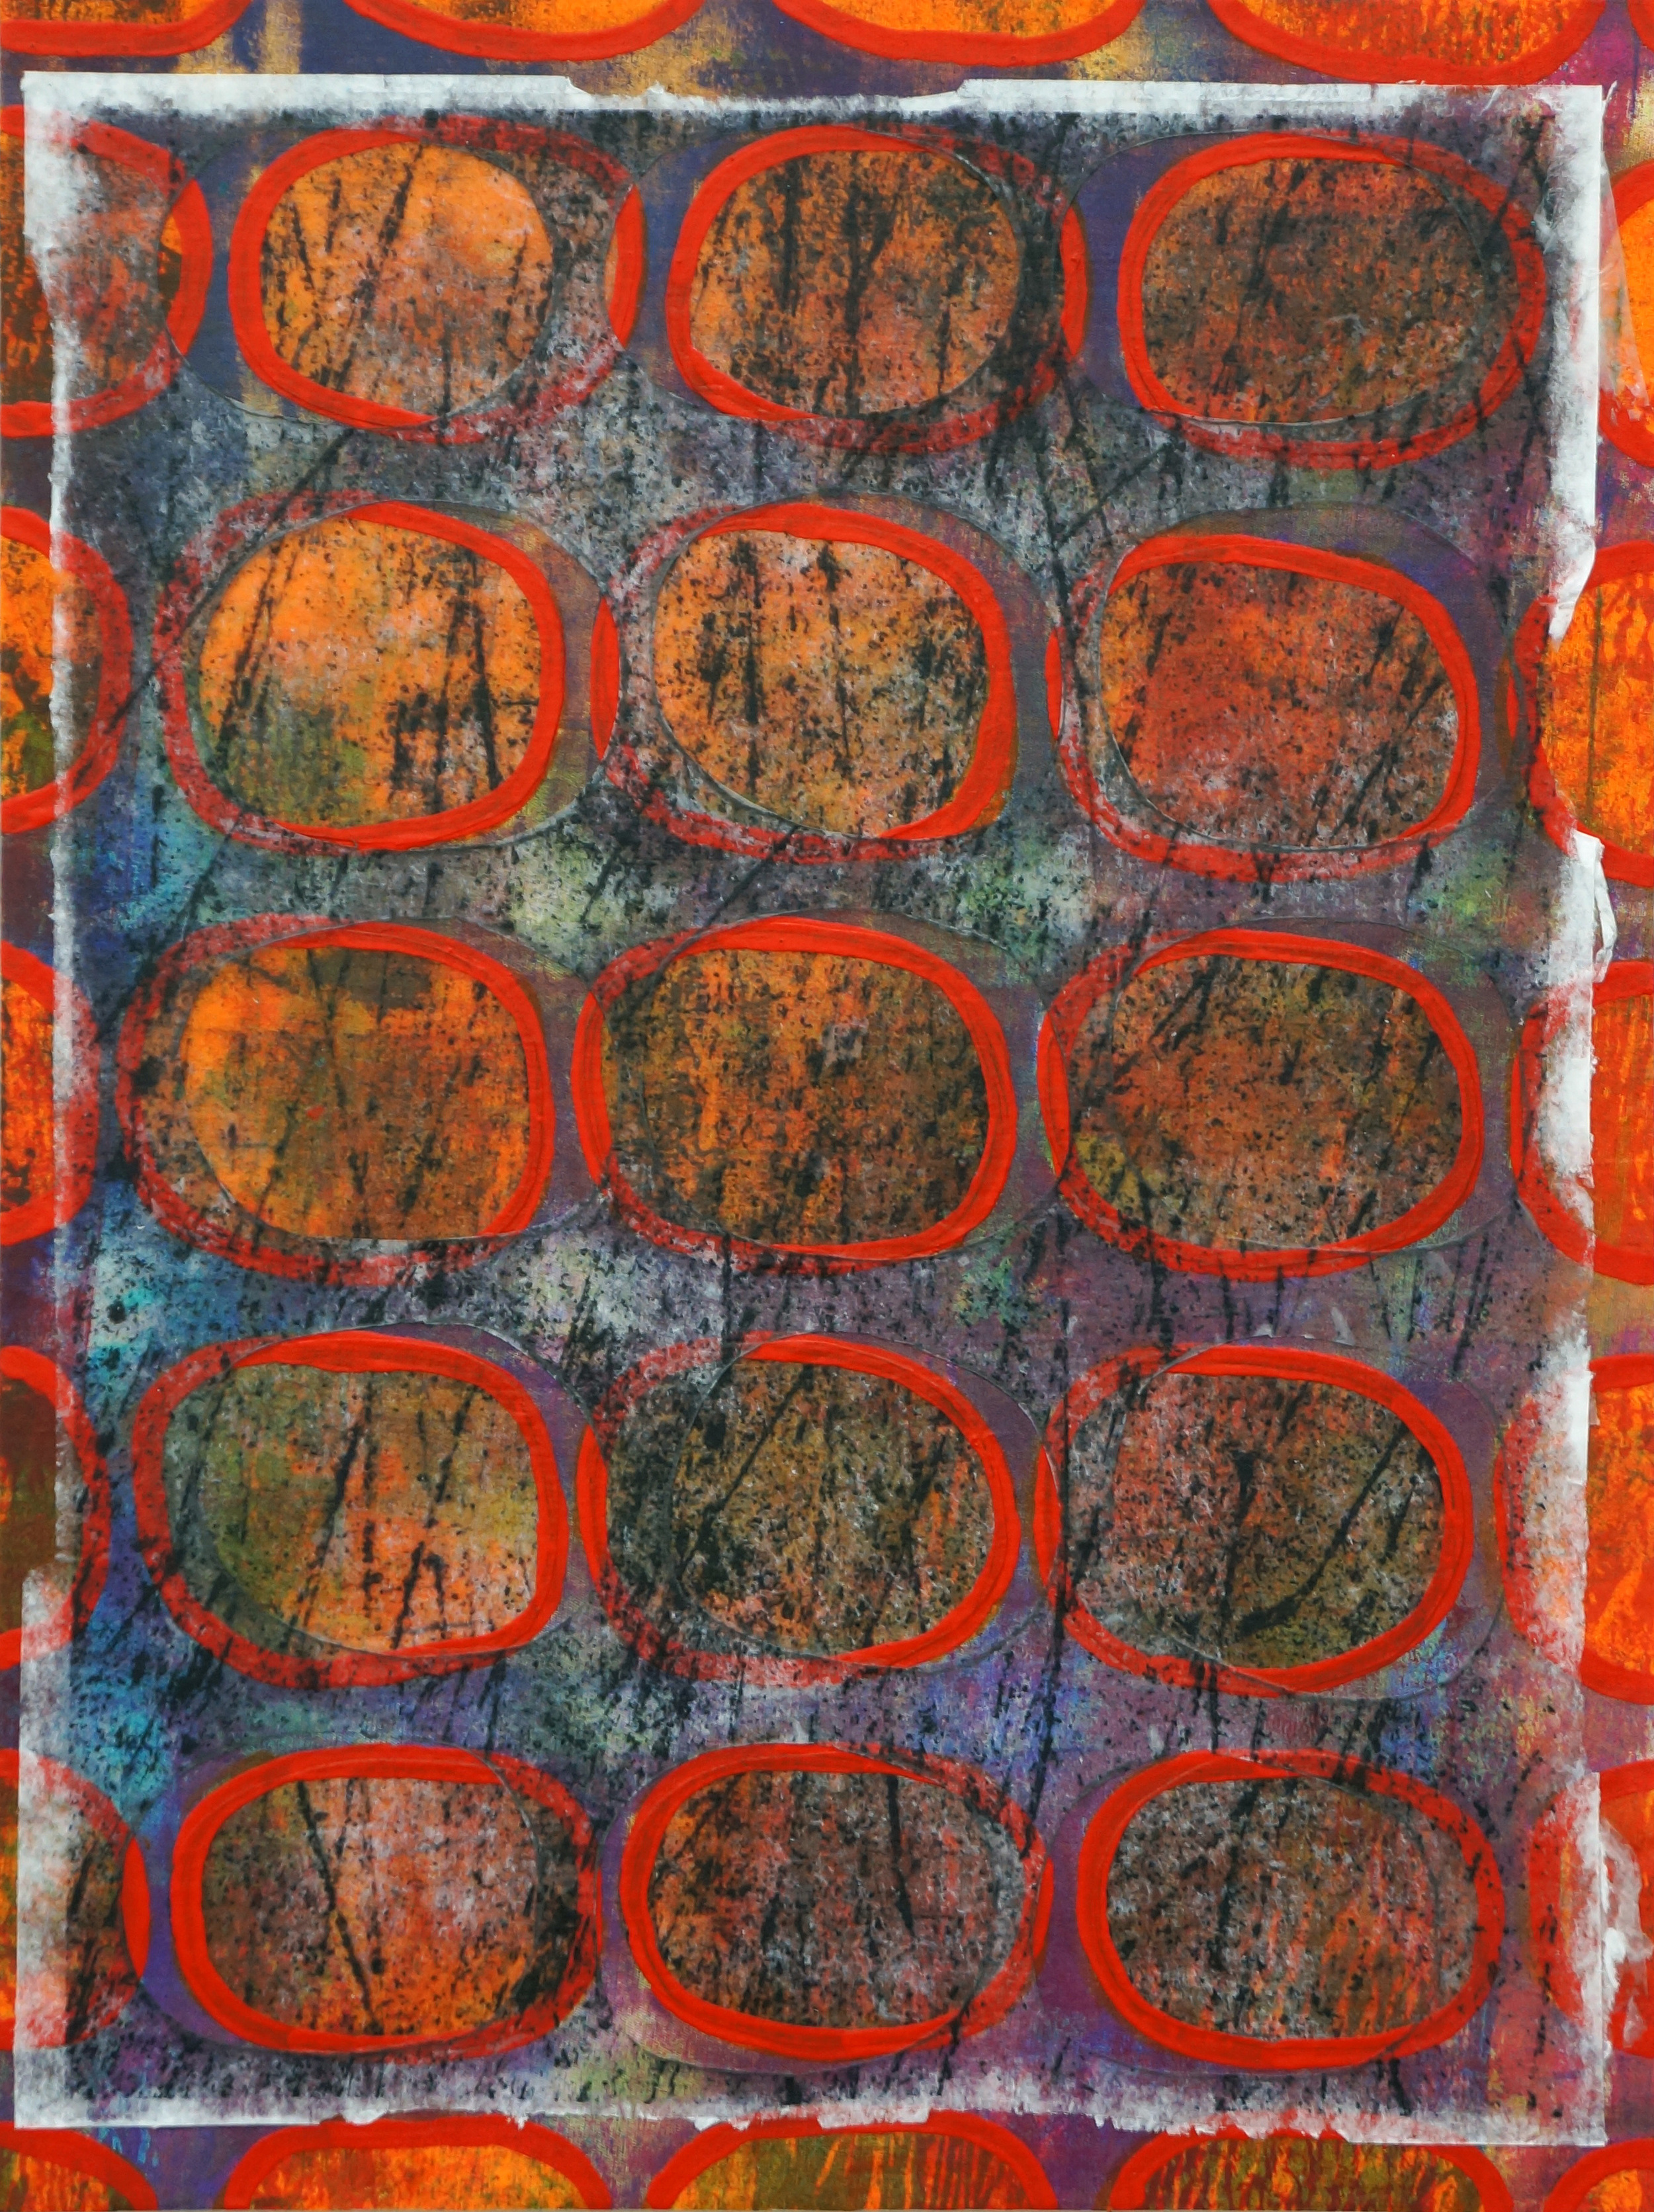  Jeanne Williamson,&nbsp; Bubbles and Cracks on Ice on Fences #4 , mixed media on cradled board, 14x14 